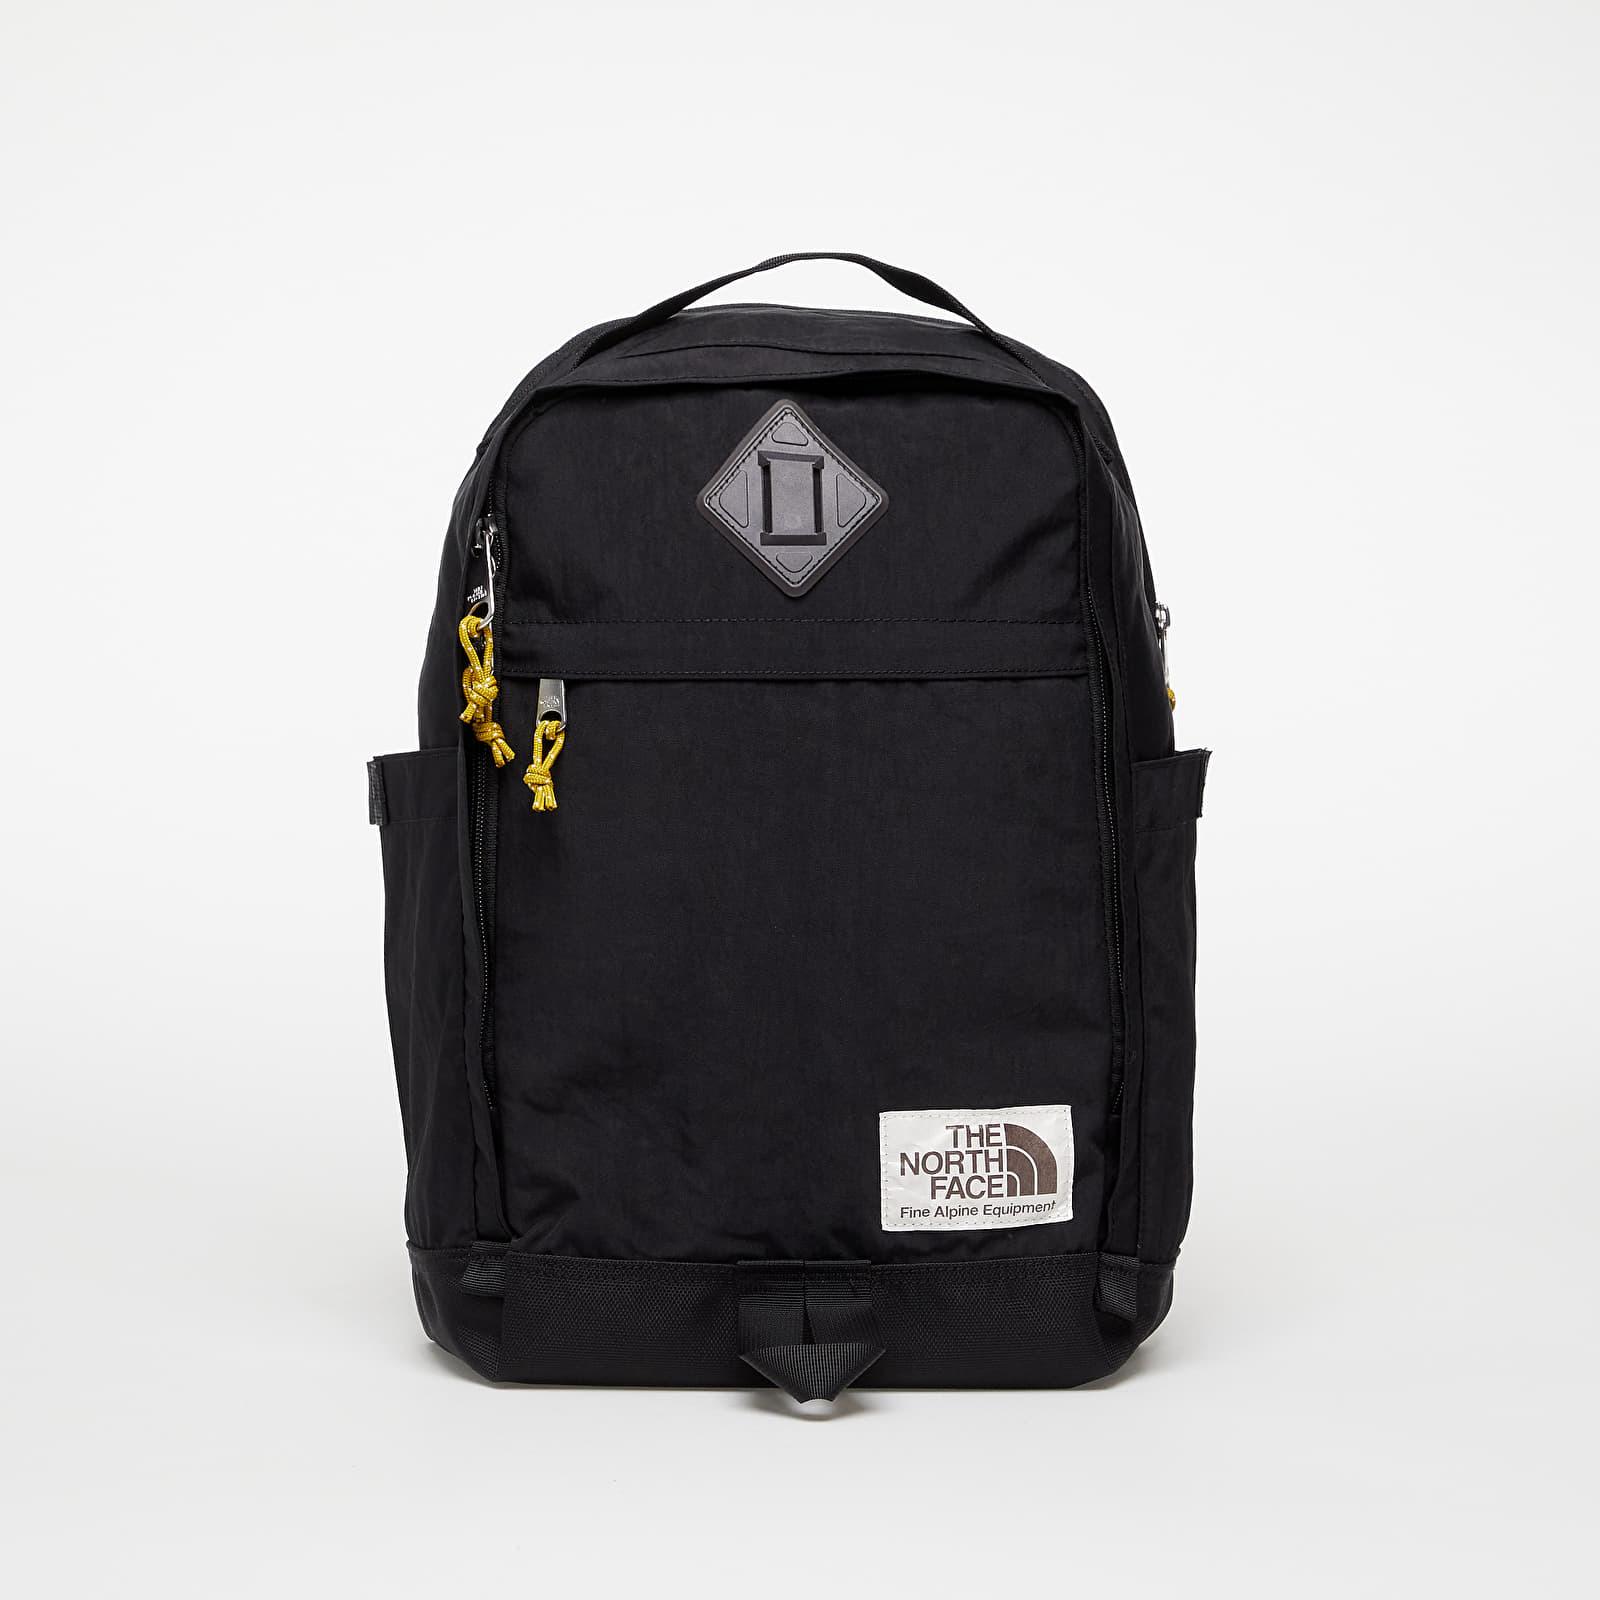 The North Face Berkeley Daypack Tnf Black/ Mineral Gold | Lyst